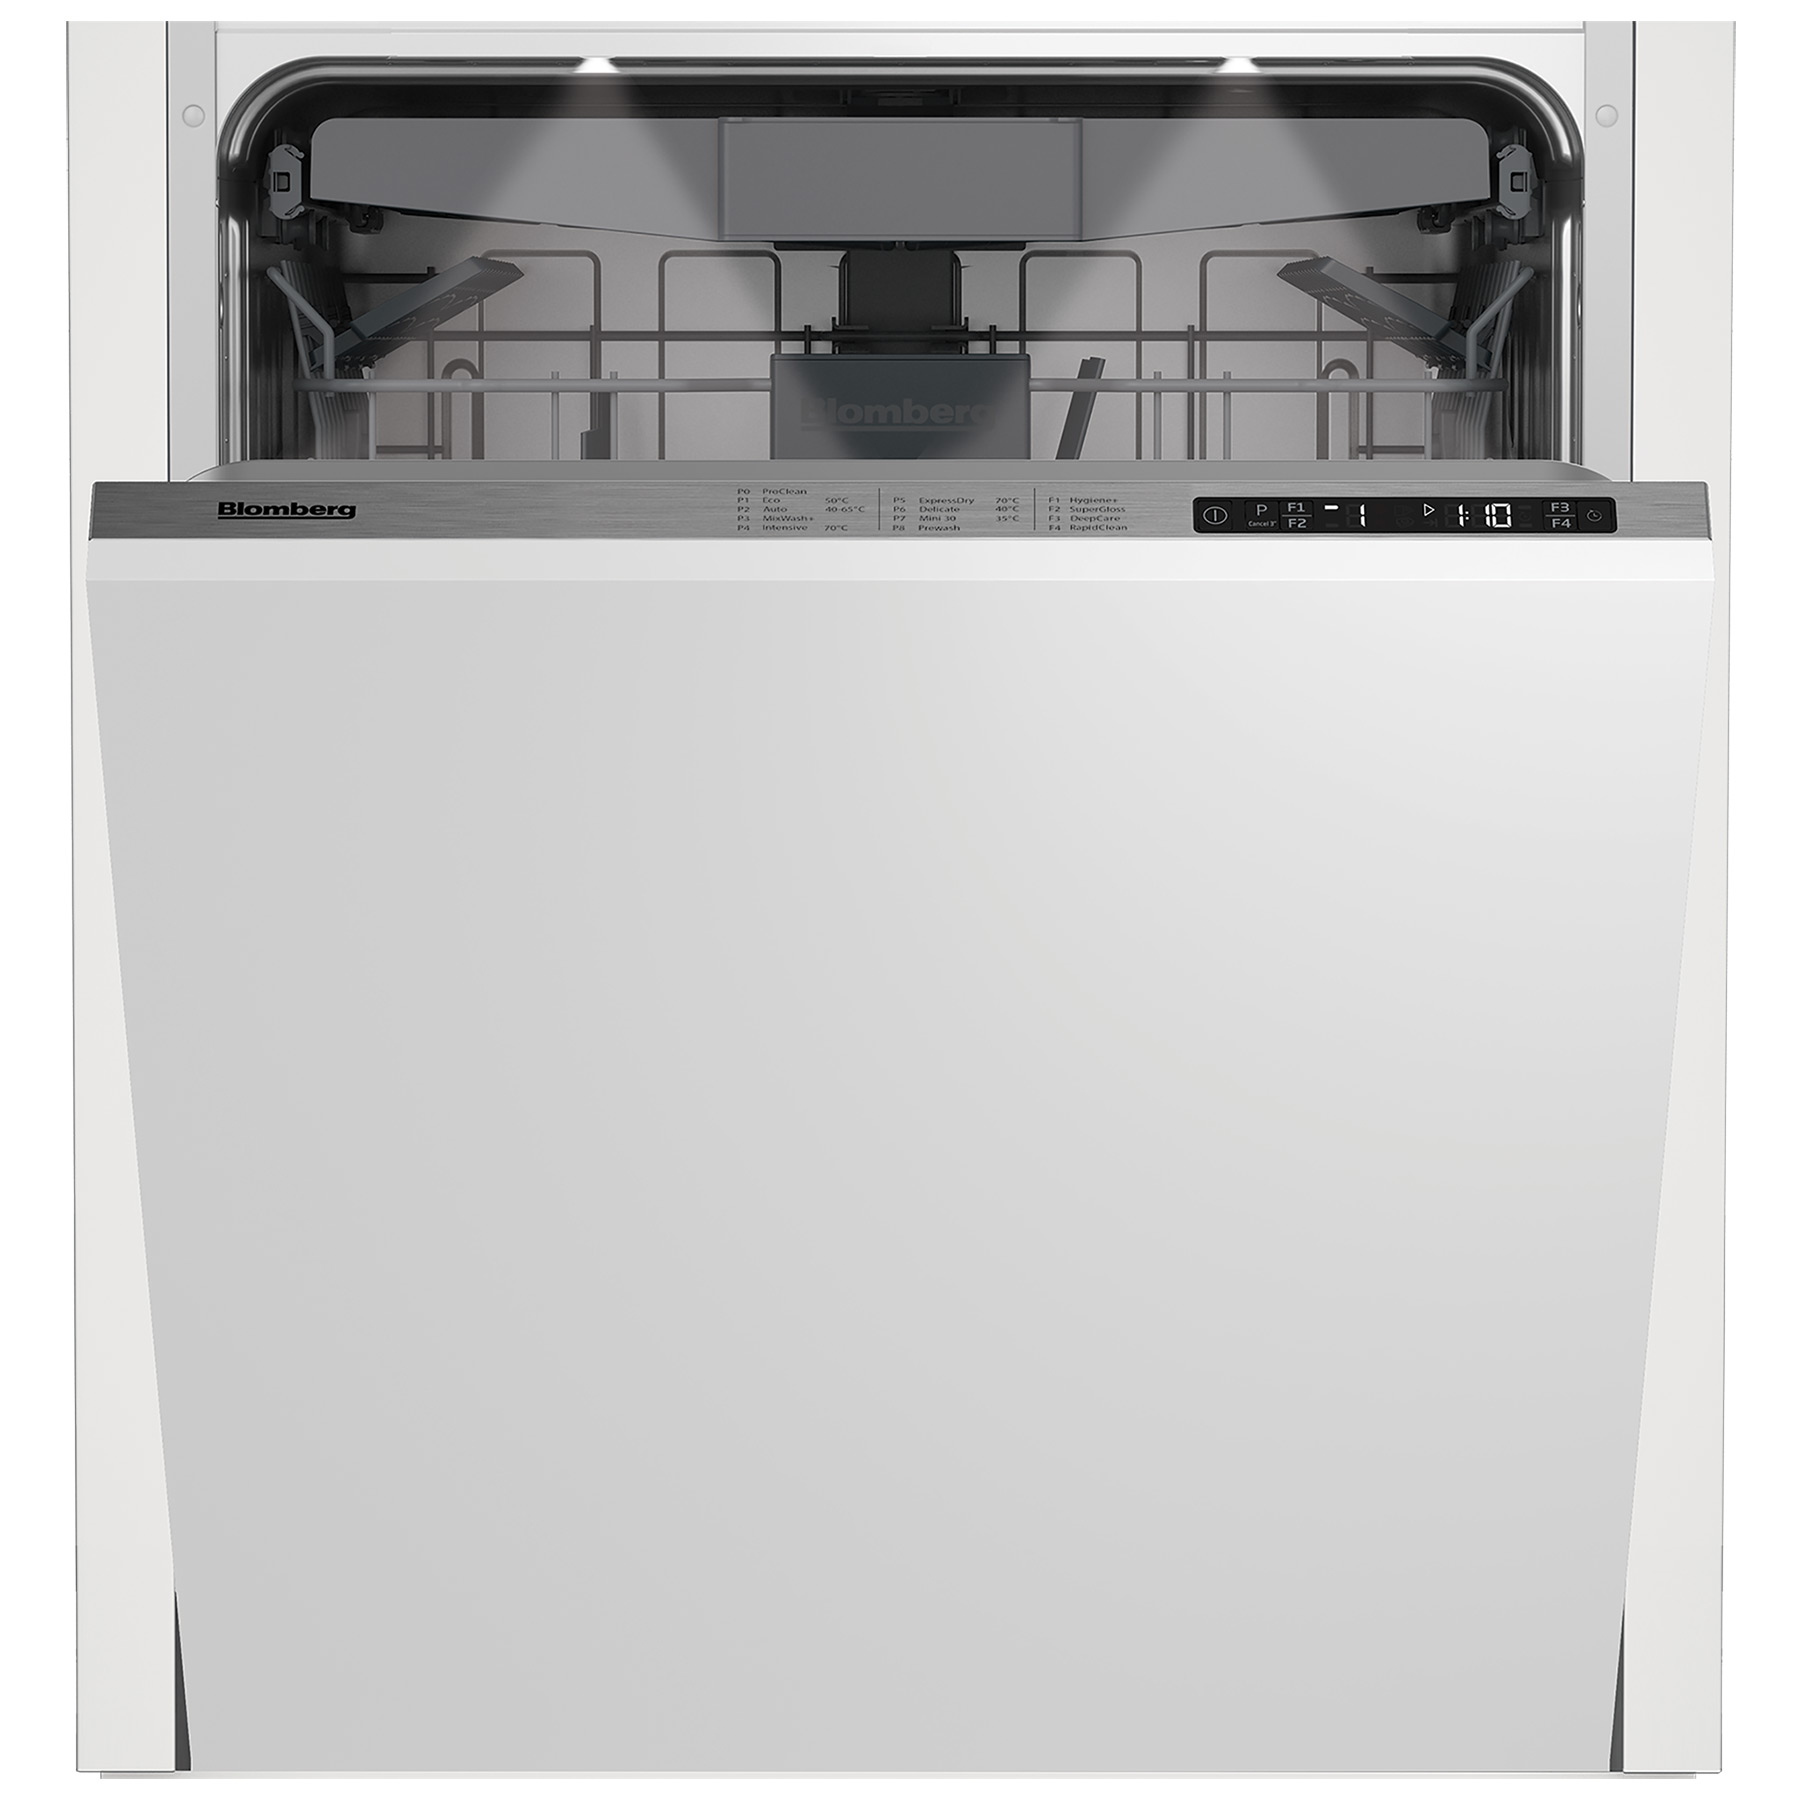 Image of Blomberg LDV63440 60cm Fully Integrated Dishwasher 16 Place C Rated